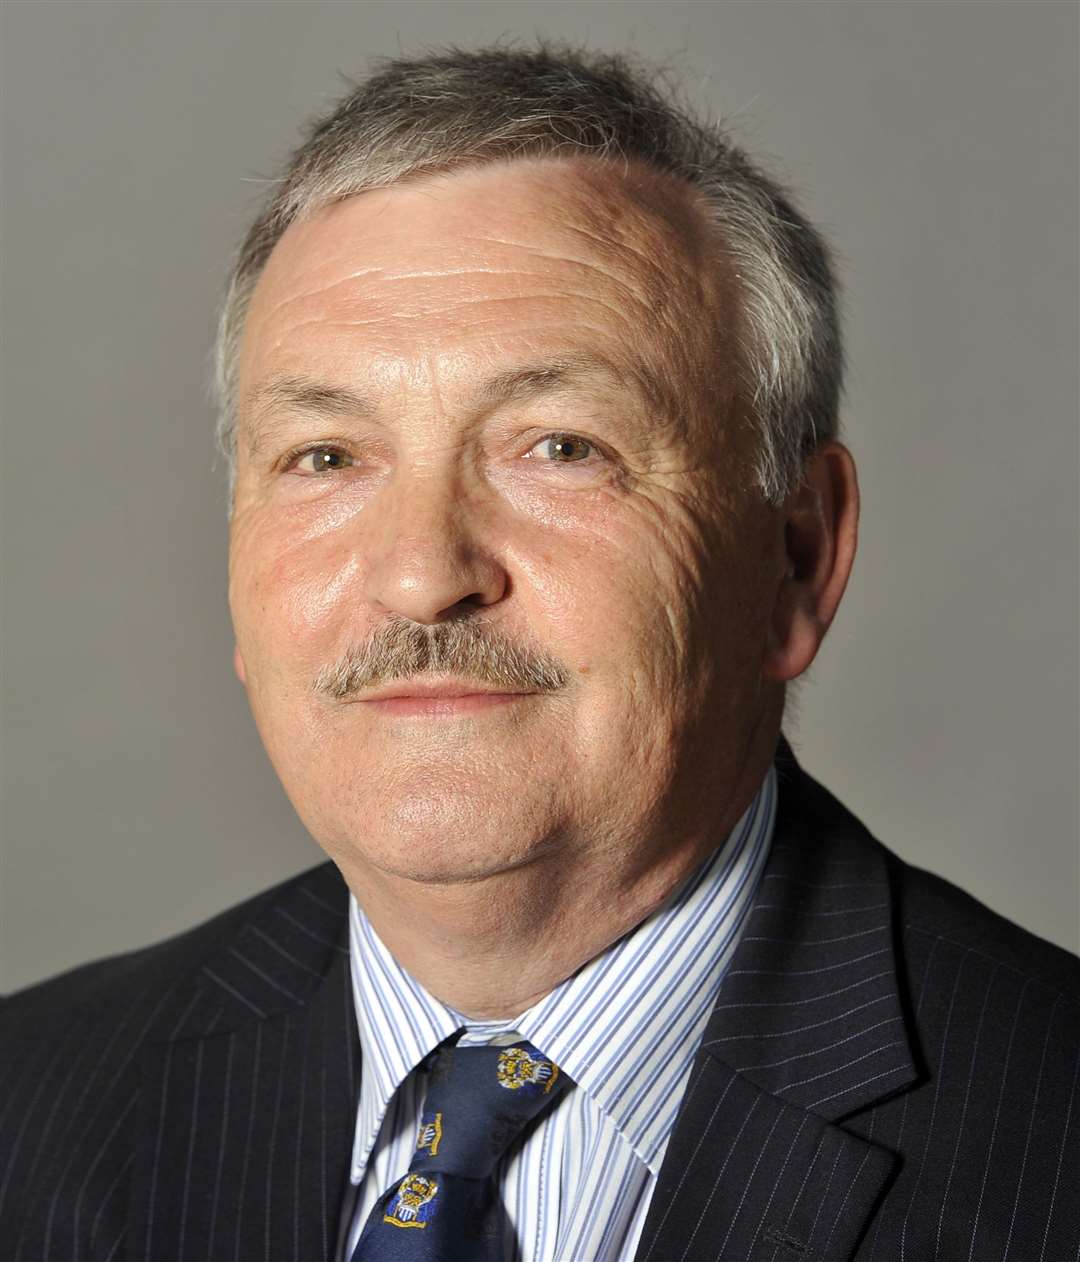 Medway Council leader Alan Jarrett has said there will be changes next year